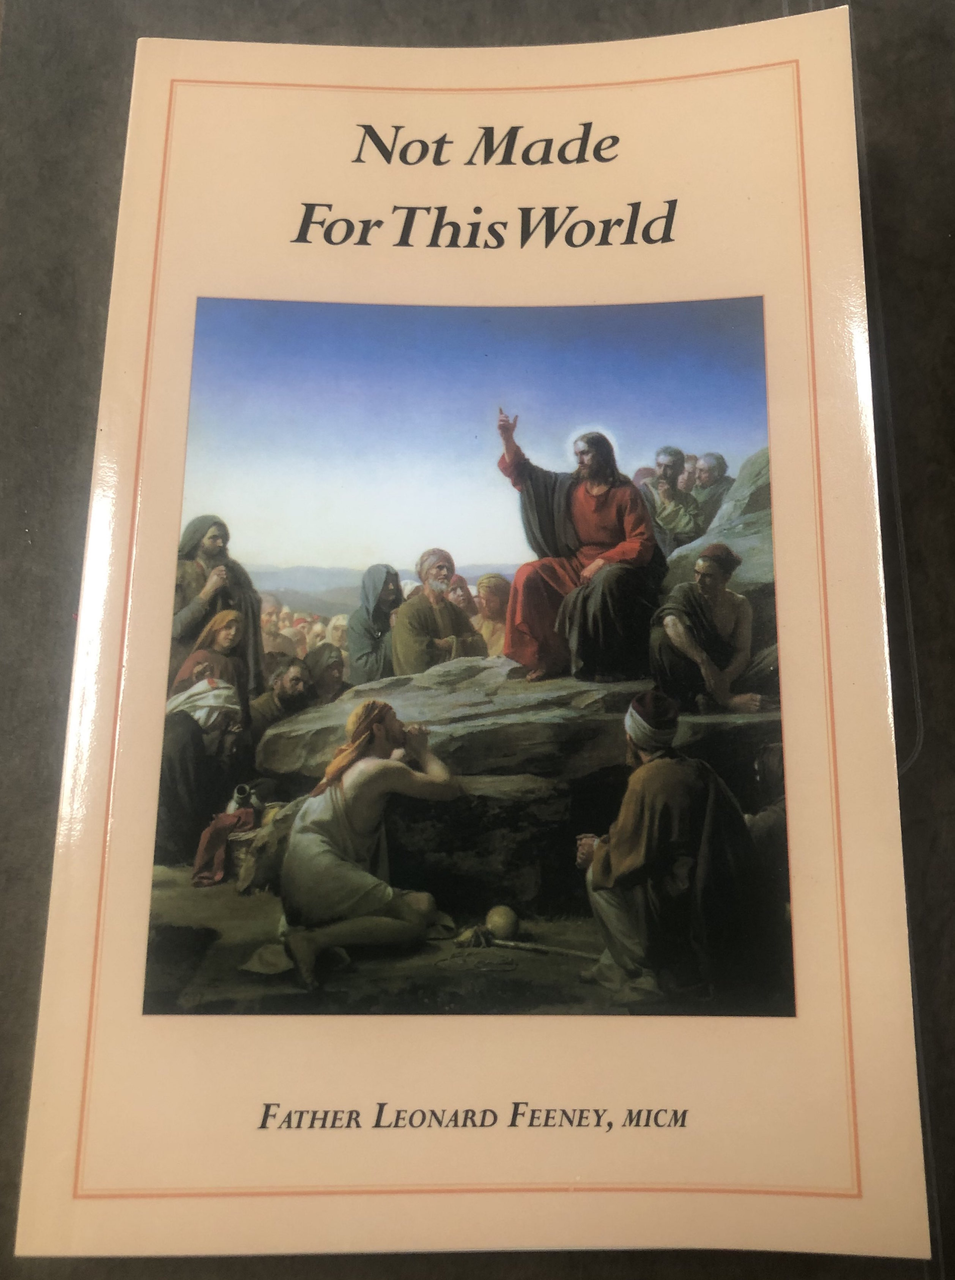 Not Made For This World by Fr. Leonard Feeney